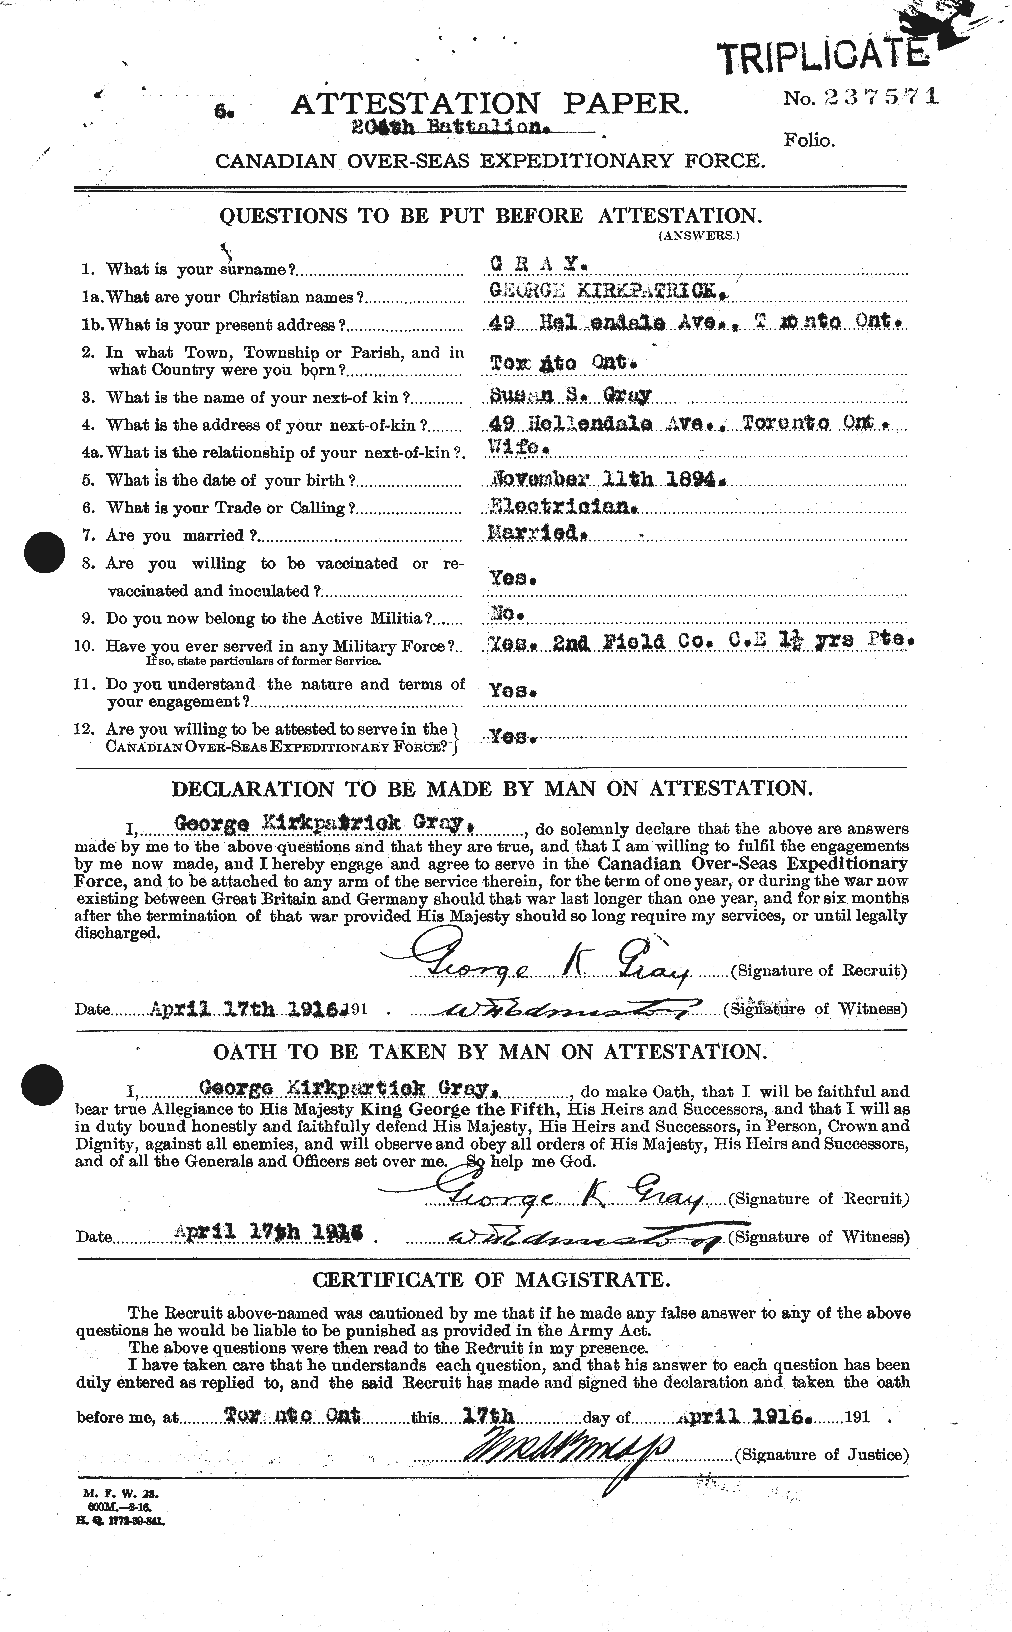 Personnel Records of the First World War - CEF 361609a